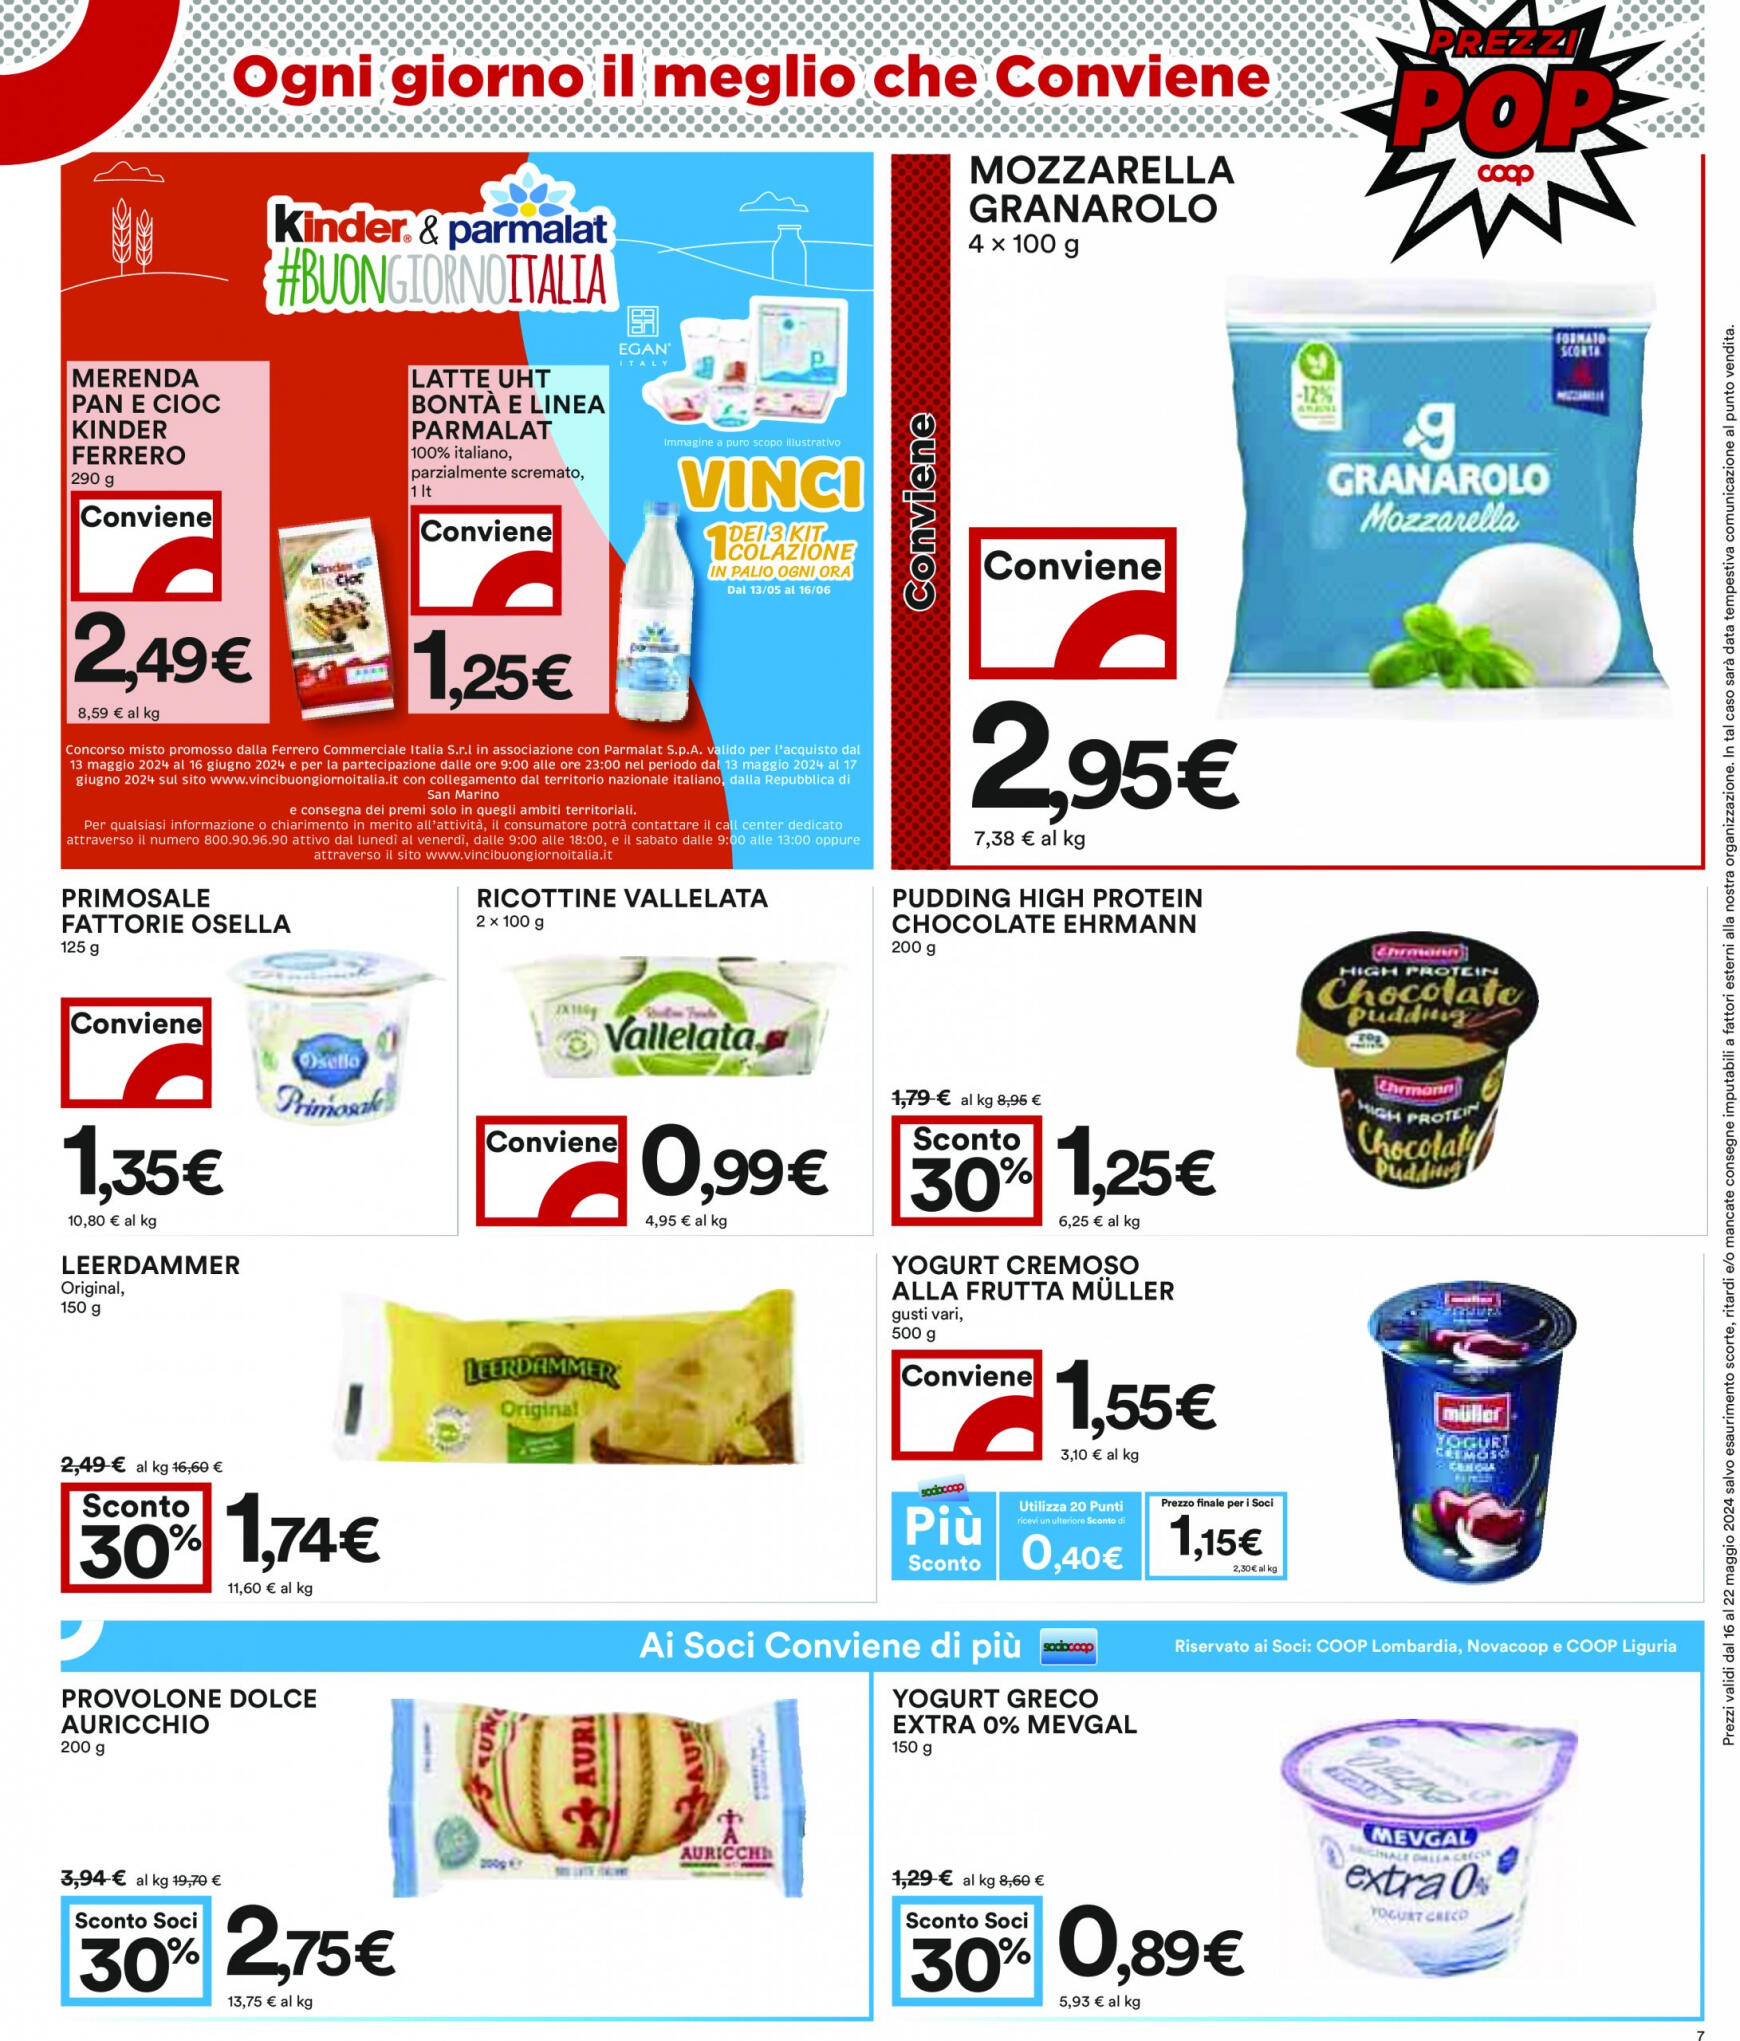 coop - Nuovo volantino Coop 16.05. - 22.05. - page: 7